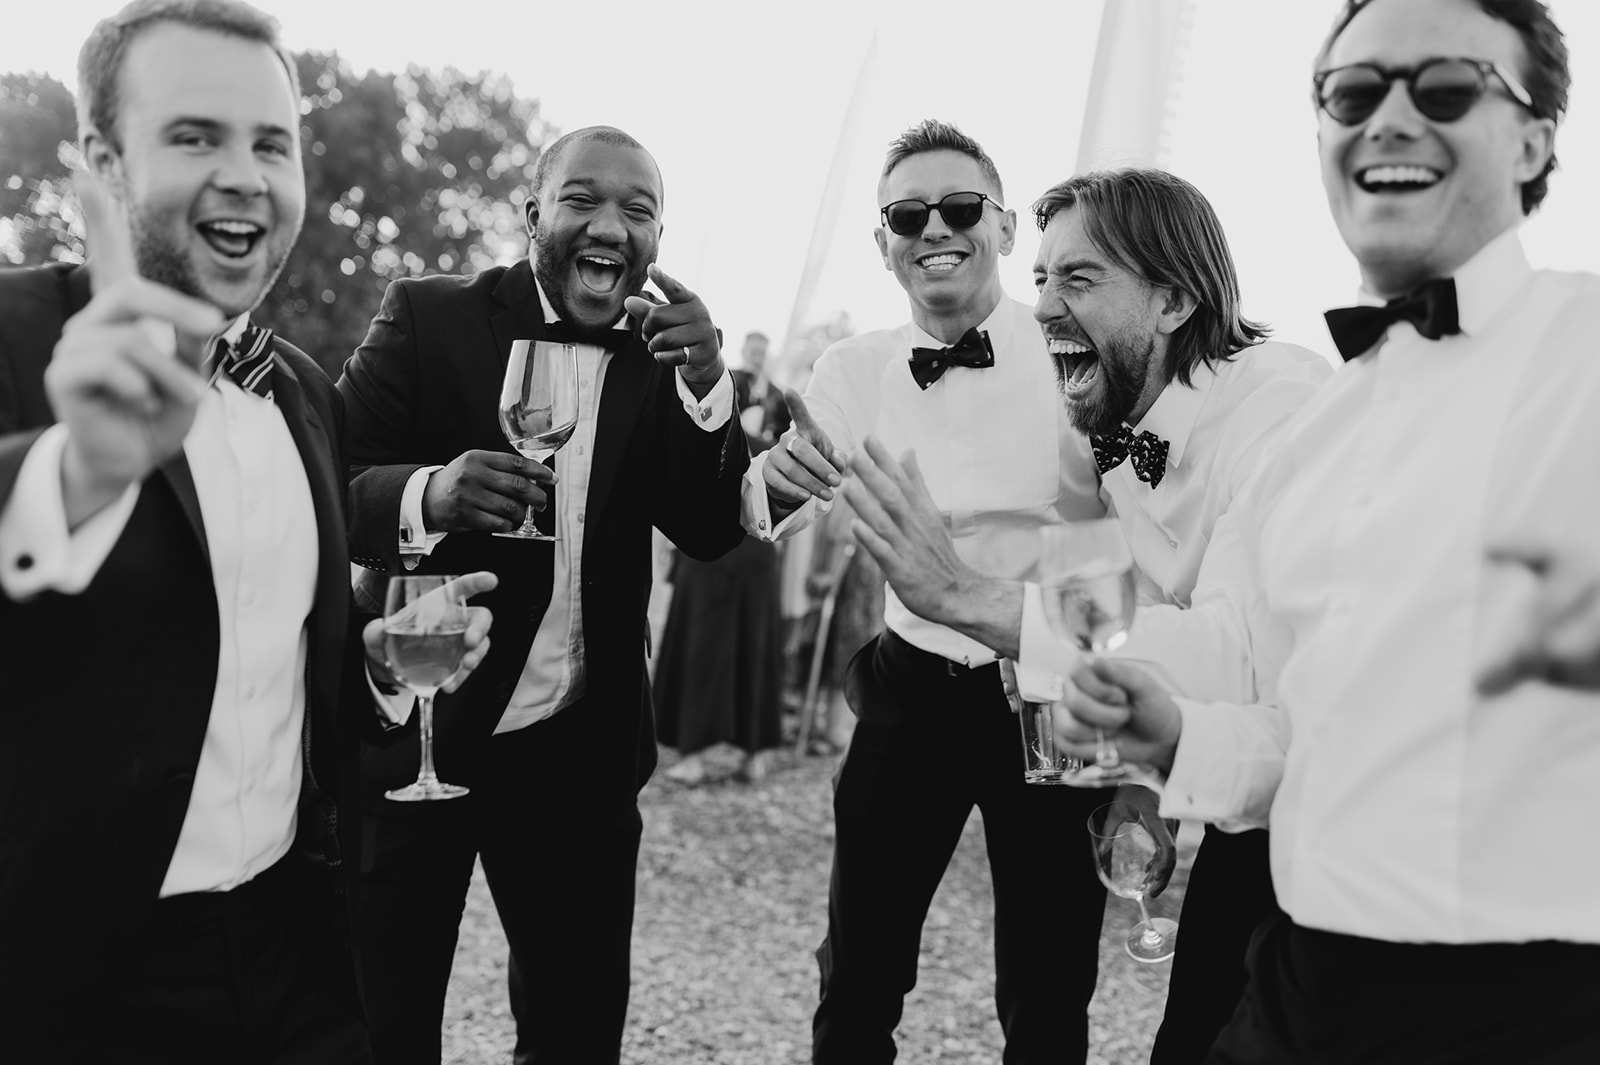 Cheerful moment captured: Four tuxedo-clad men laugh and raise champagne glasses at a festive outdoor event.'